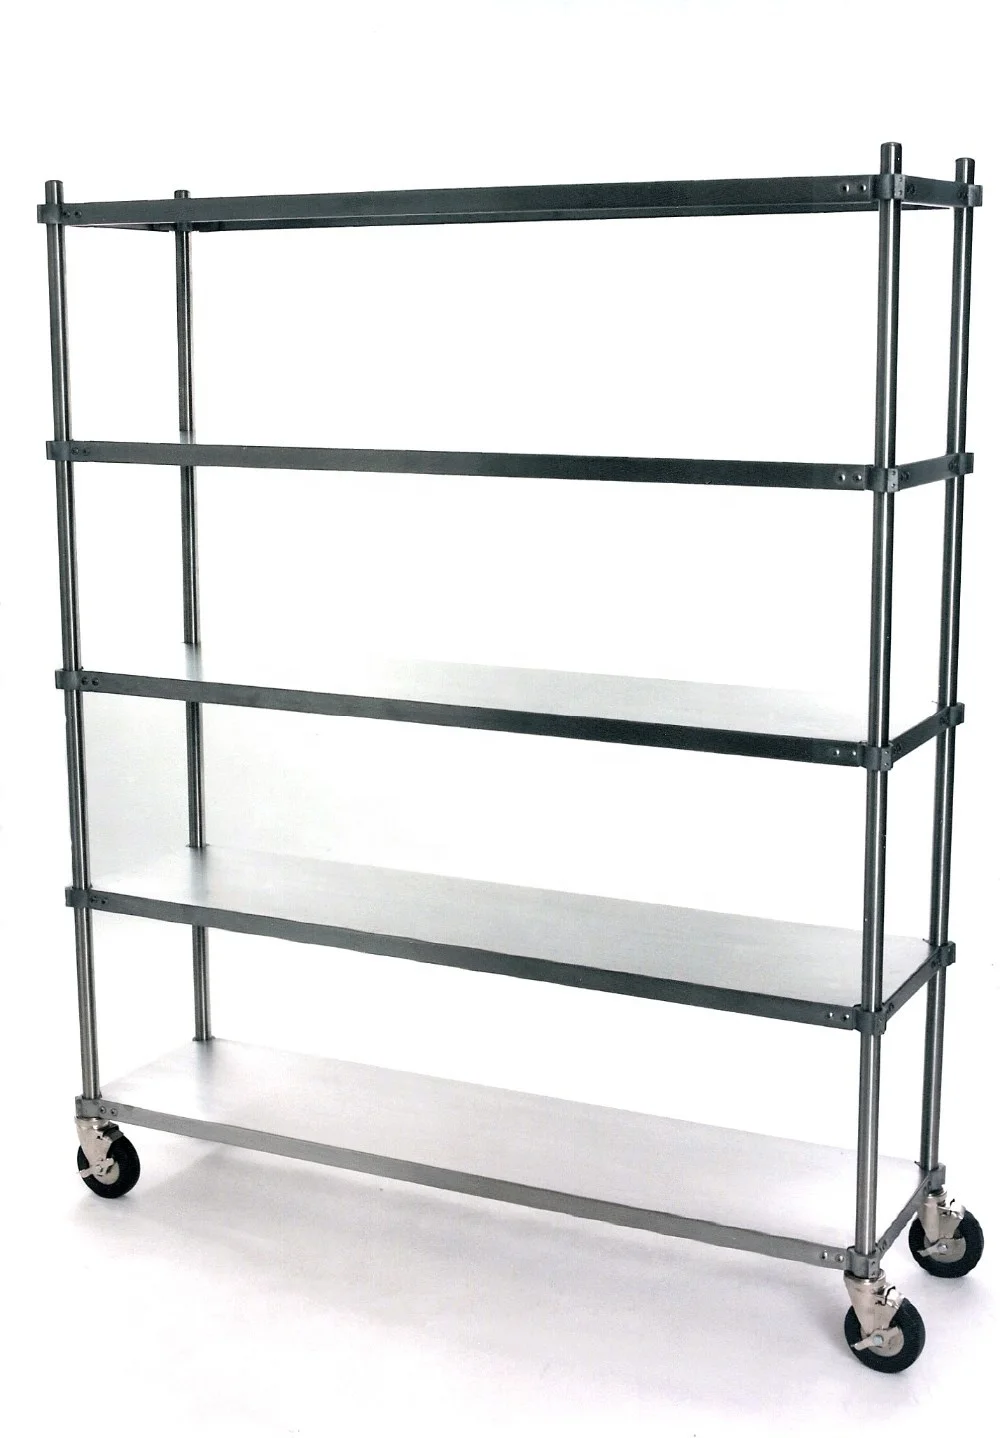 OEM NSF Approval 3 4 5 Tier Commercial Kitchen Storage Flat Rack Anti-bacterial Epoxy wire shelf shelving with casters